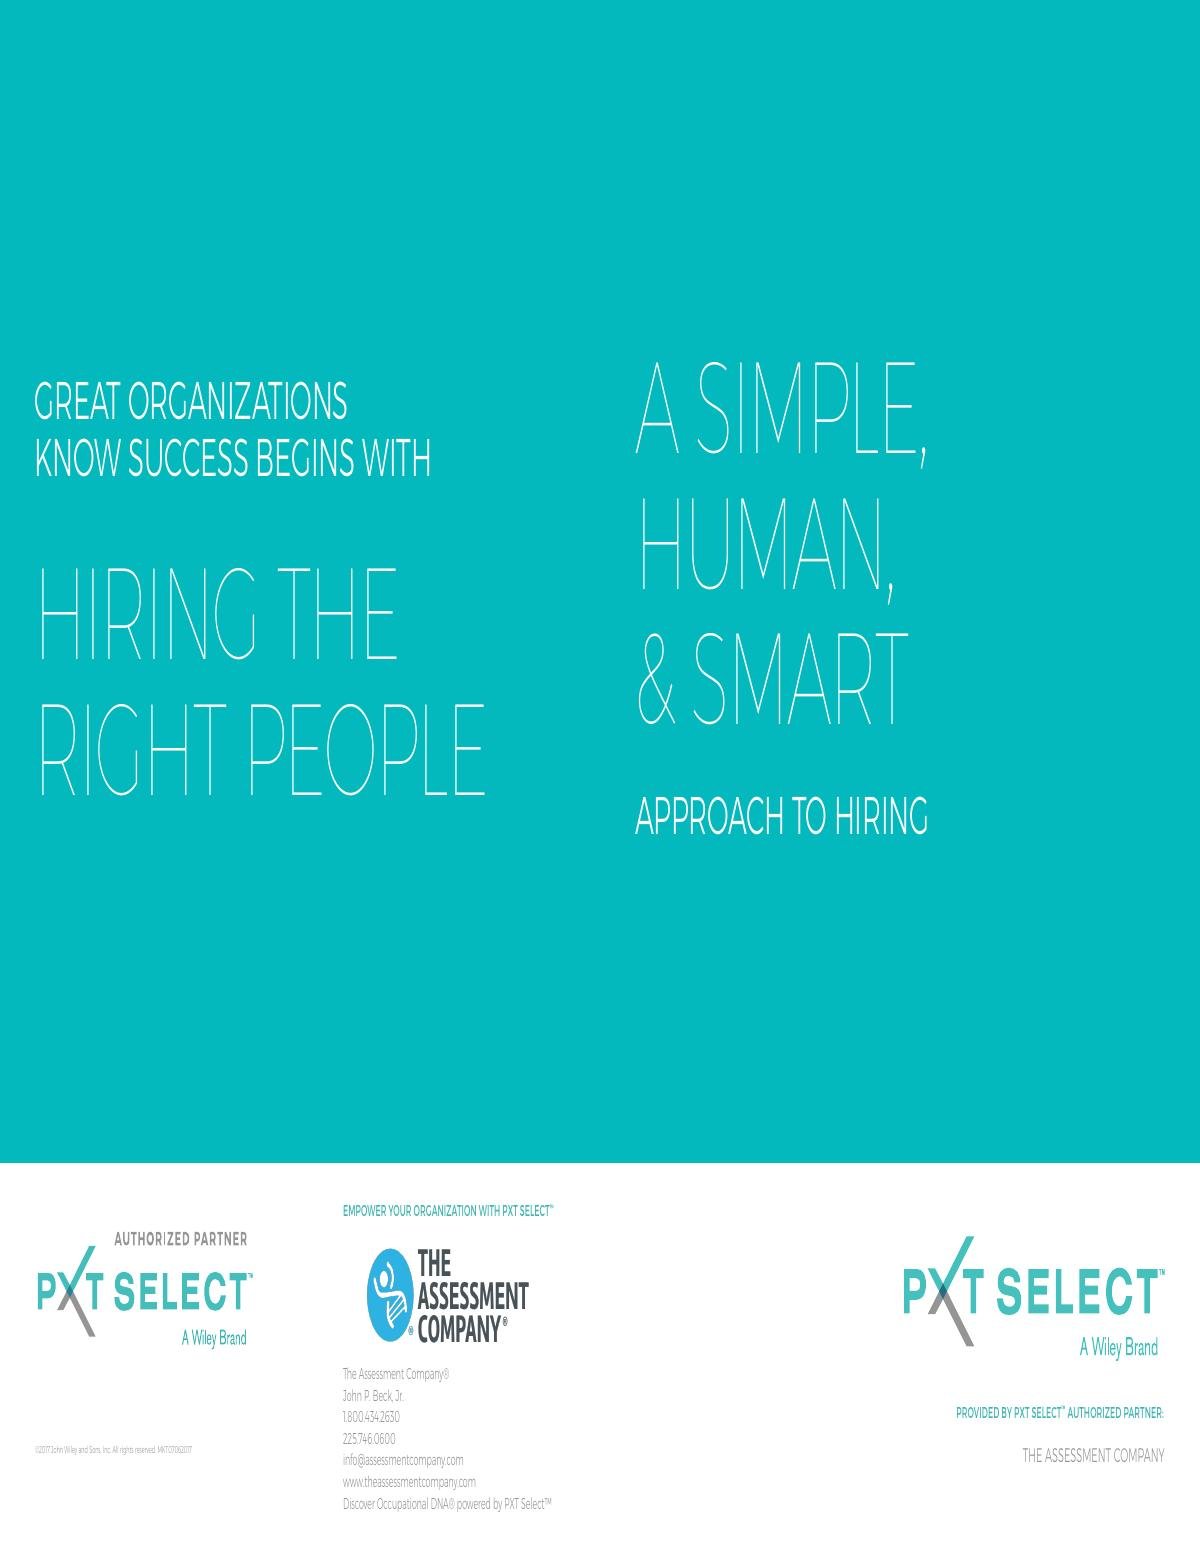 CREATING A GREAT PLACE TO WORK STARTS WITH HIRING THE RIGHT PEOPLE.